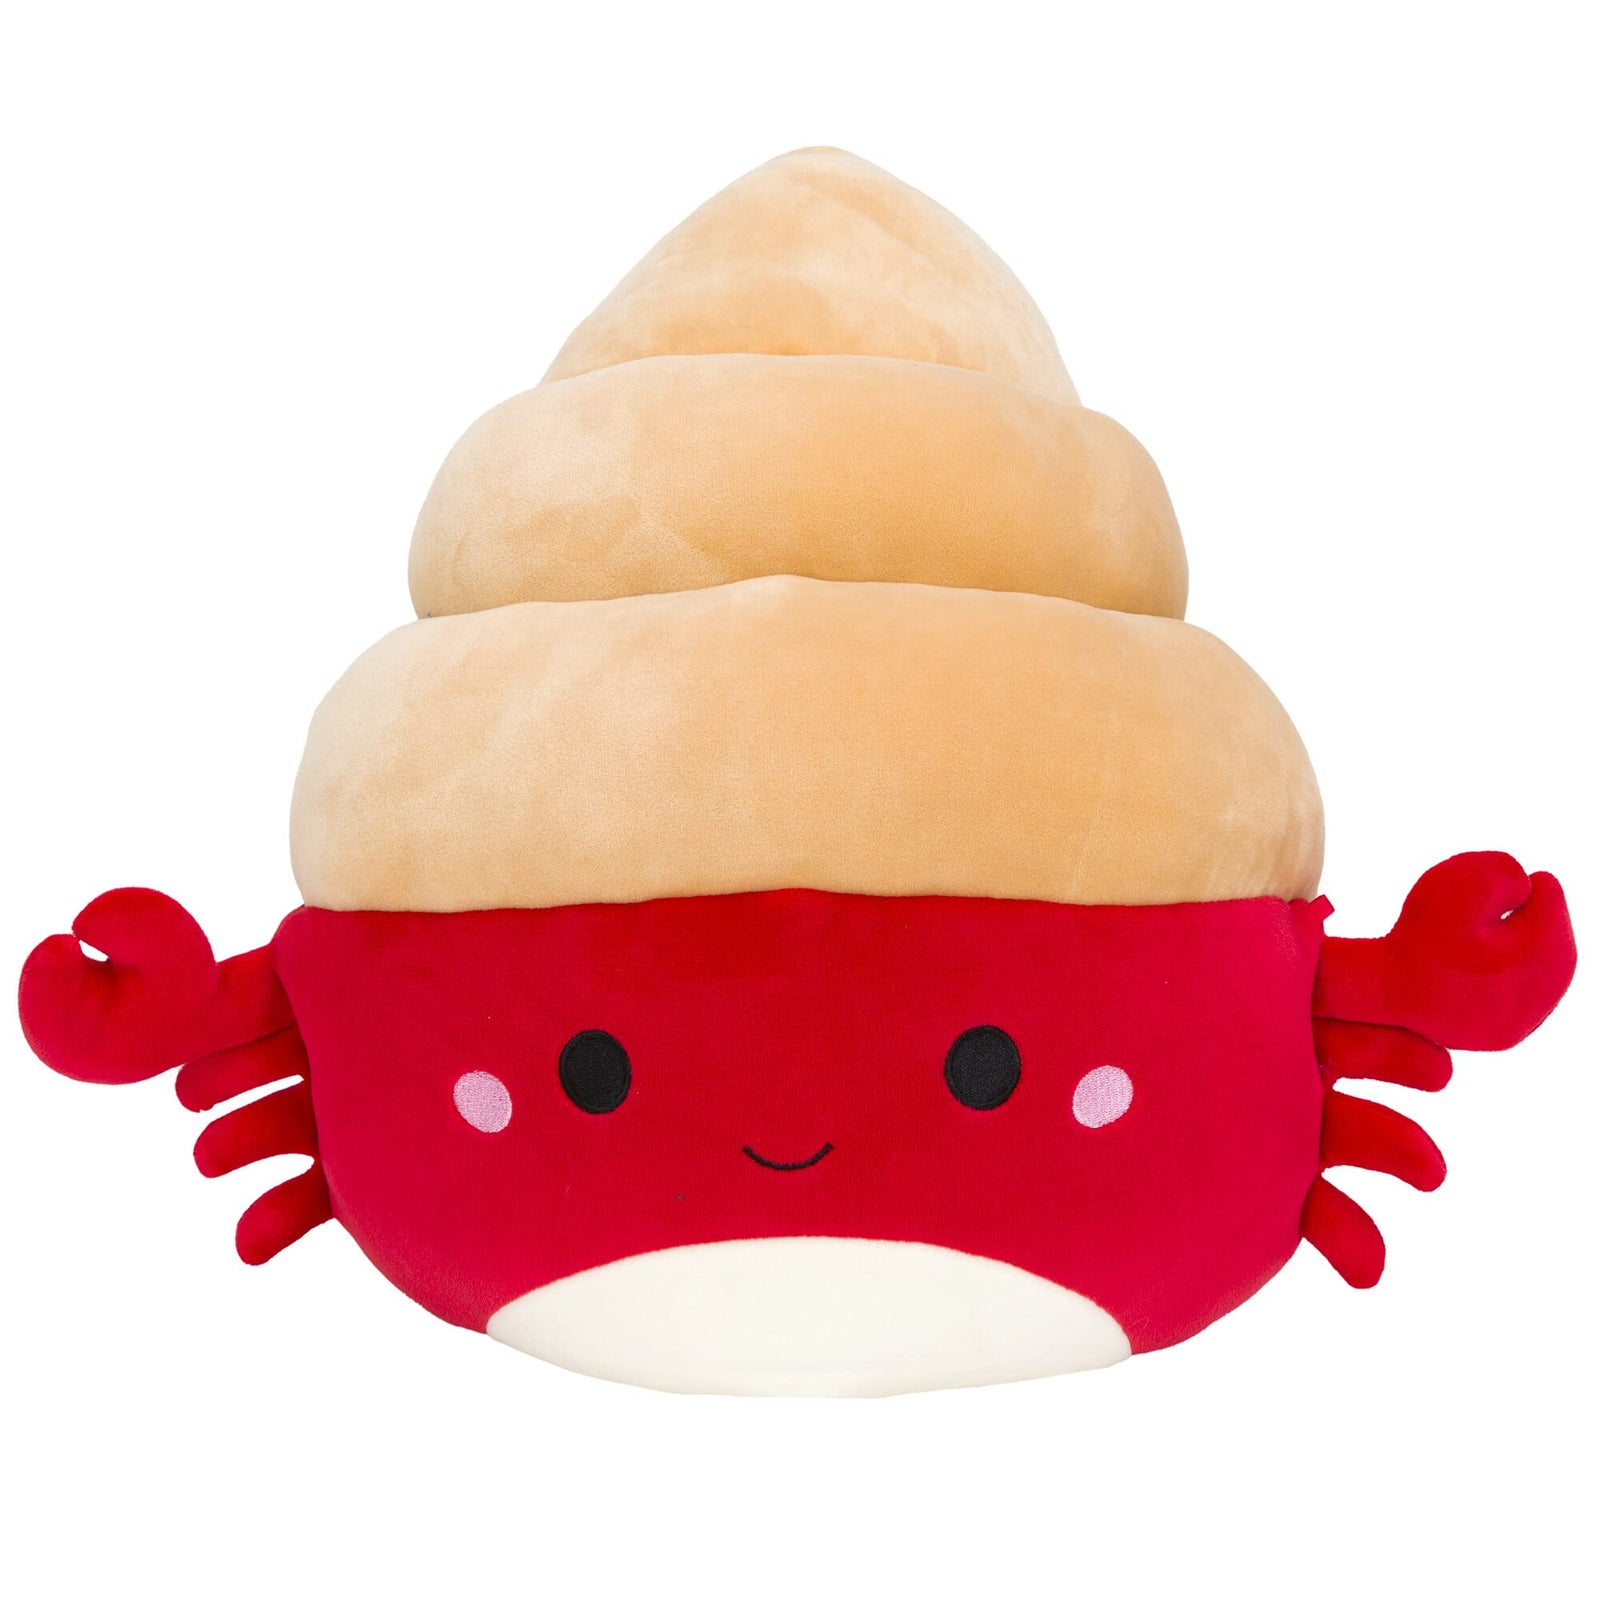 Squishmallow 12-Inch Hermit Crab - Add Indie to Your Squad, Ultrasoft Stuffed Animal Medium-Sized Plush Toy, Official Kellytoy Plush